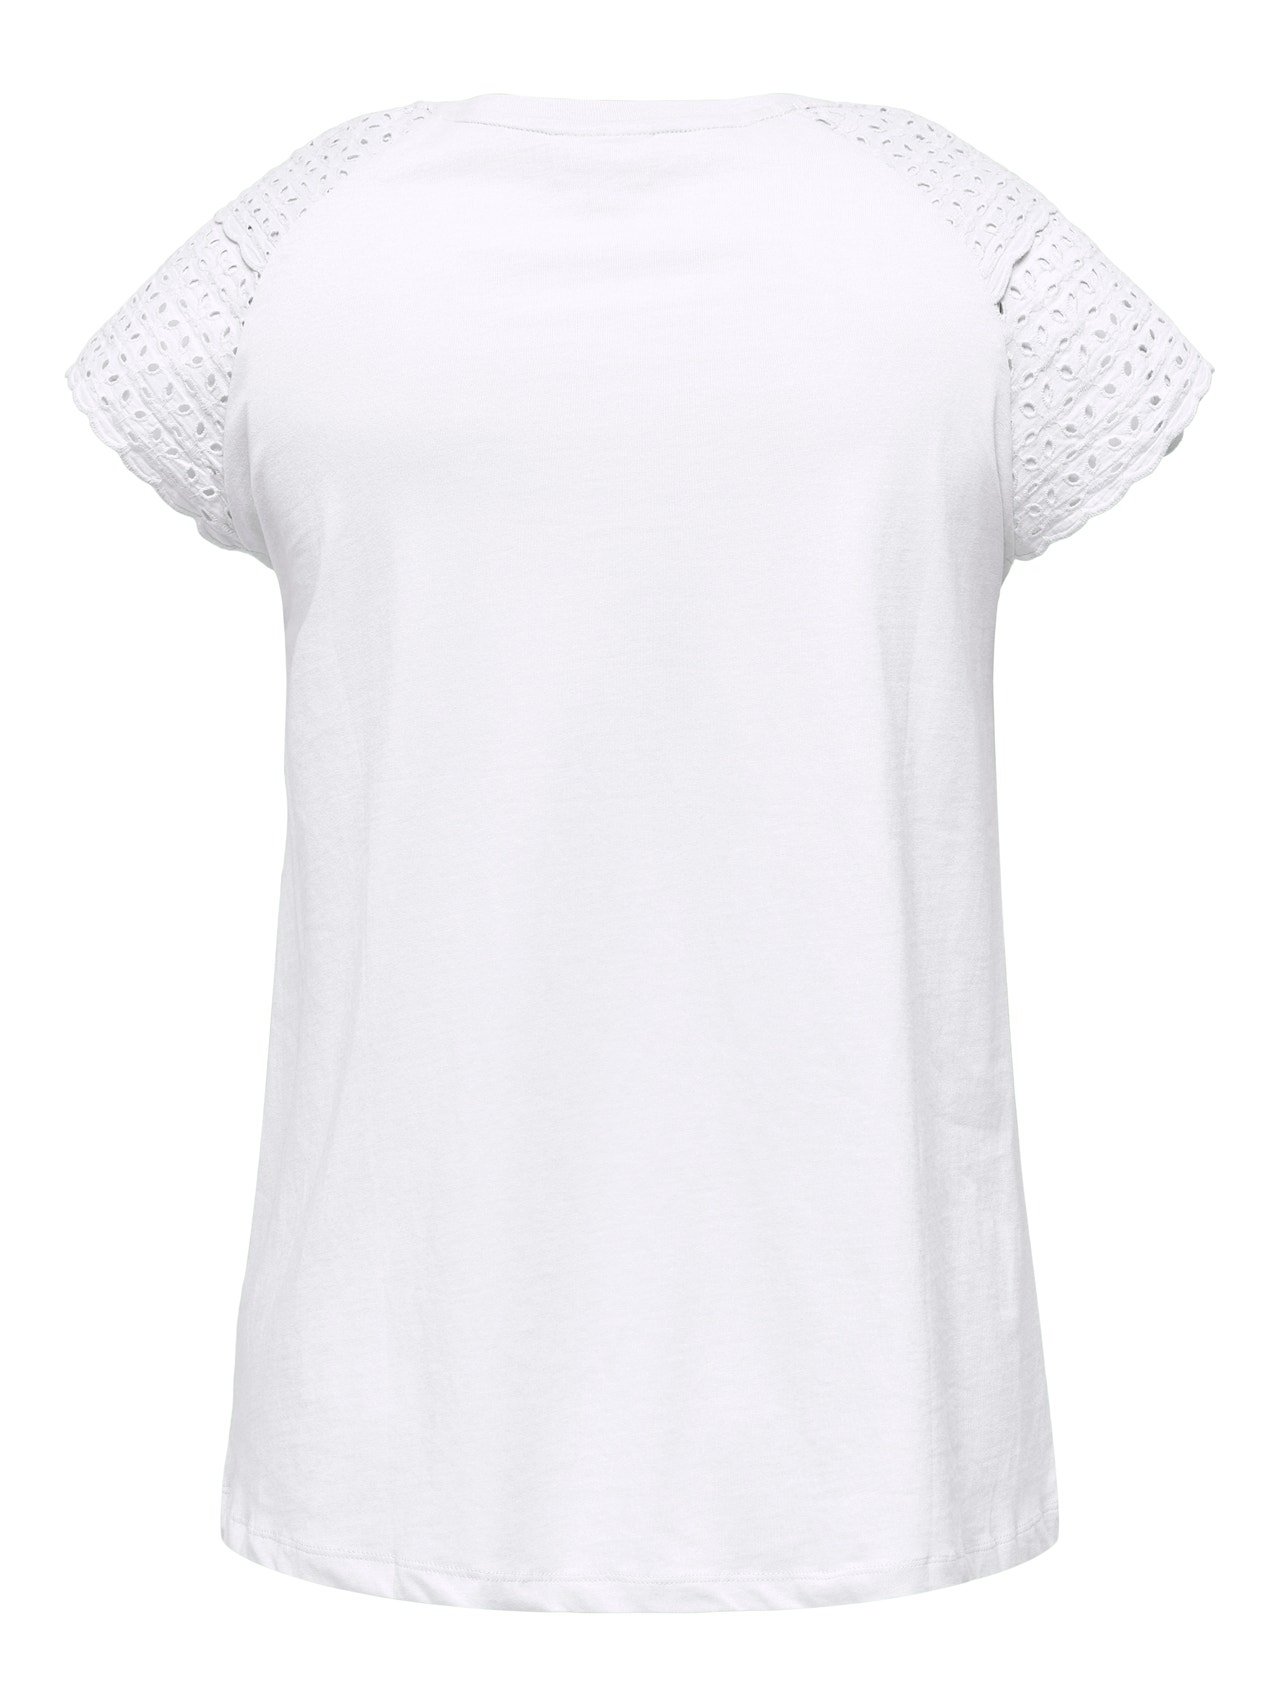 ONLY Regular Fit Round Neck Curve Top -White - 15319844